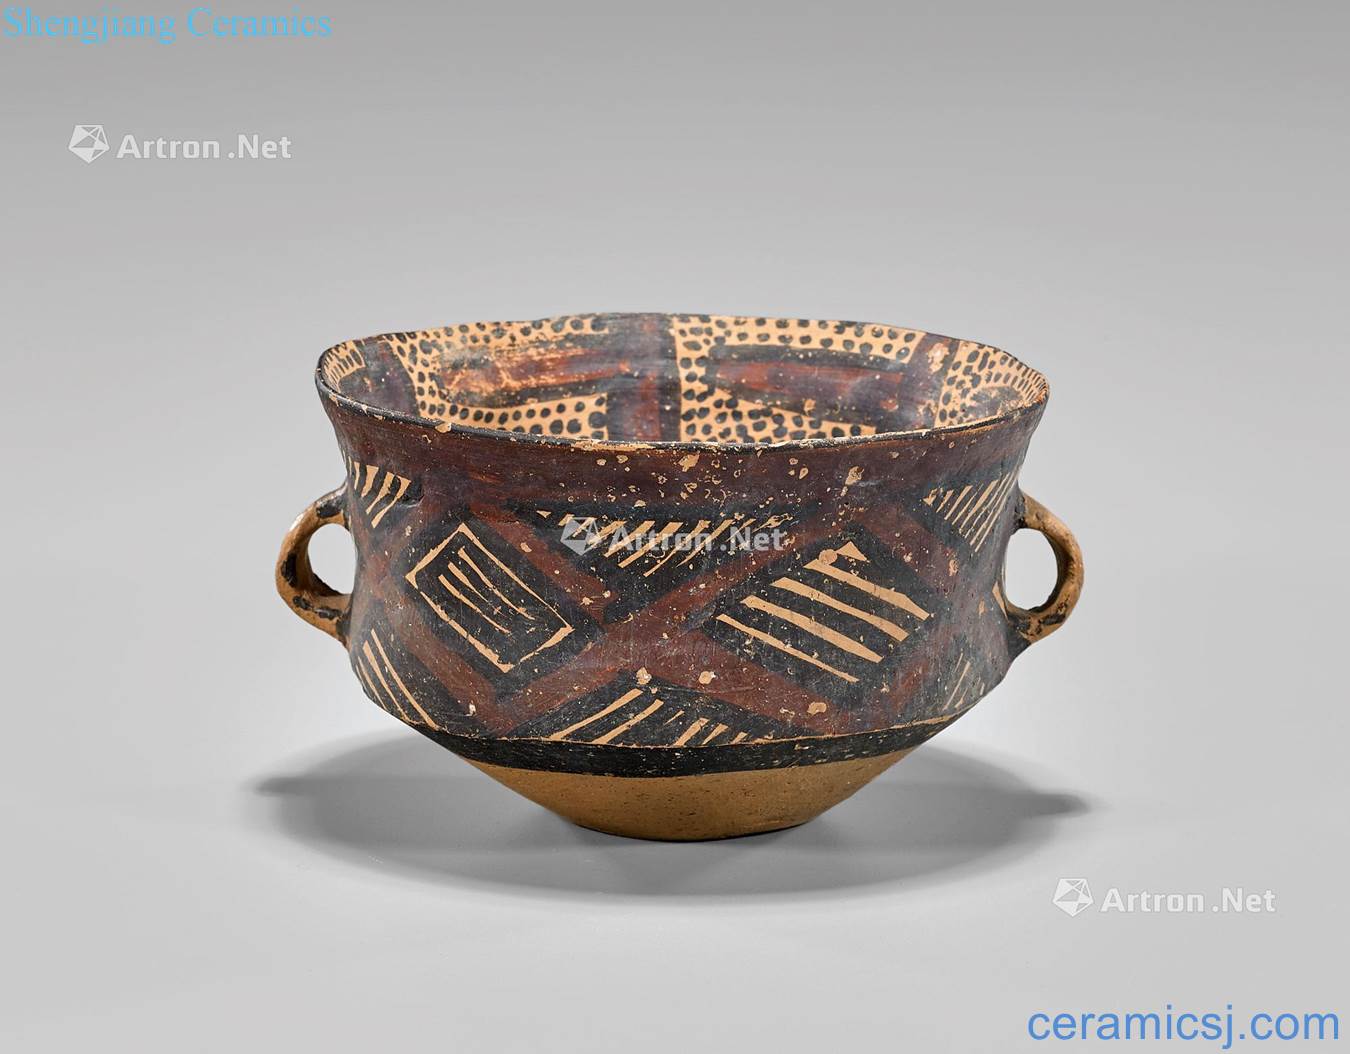 China's neolithic period earthenware bowl